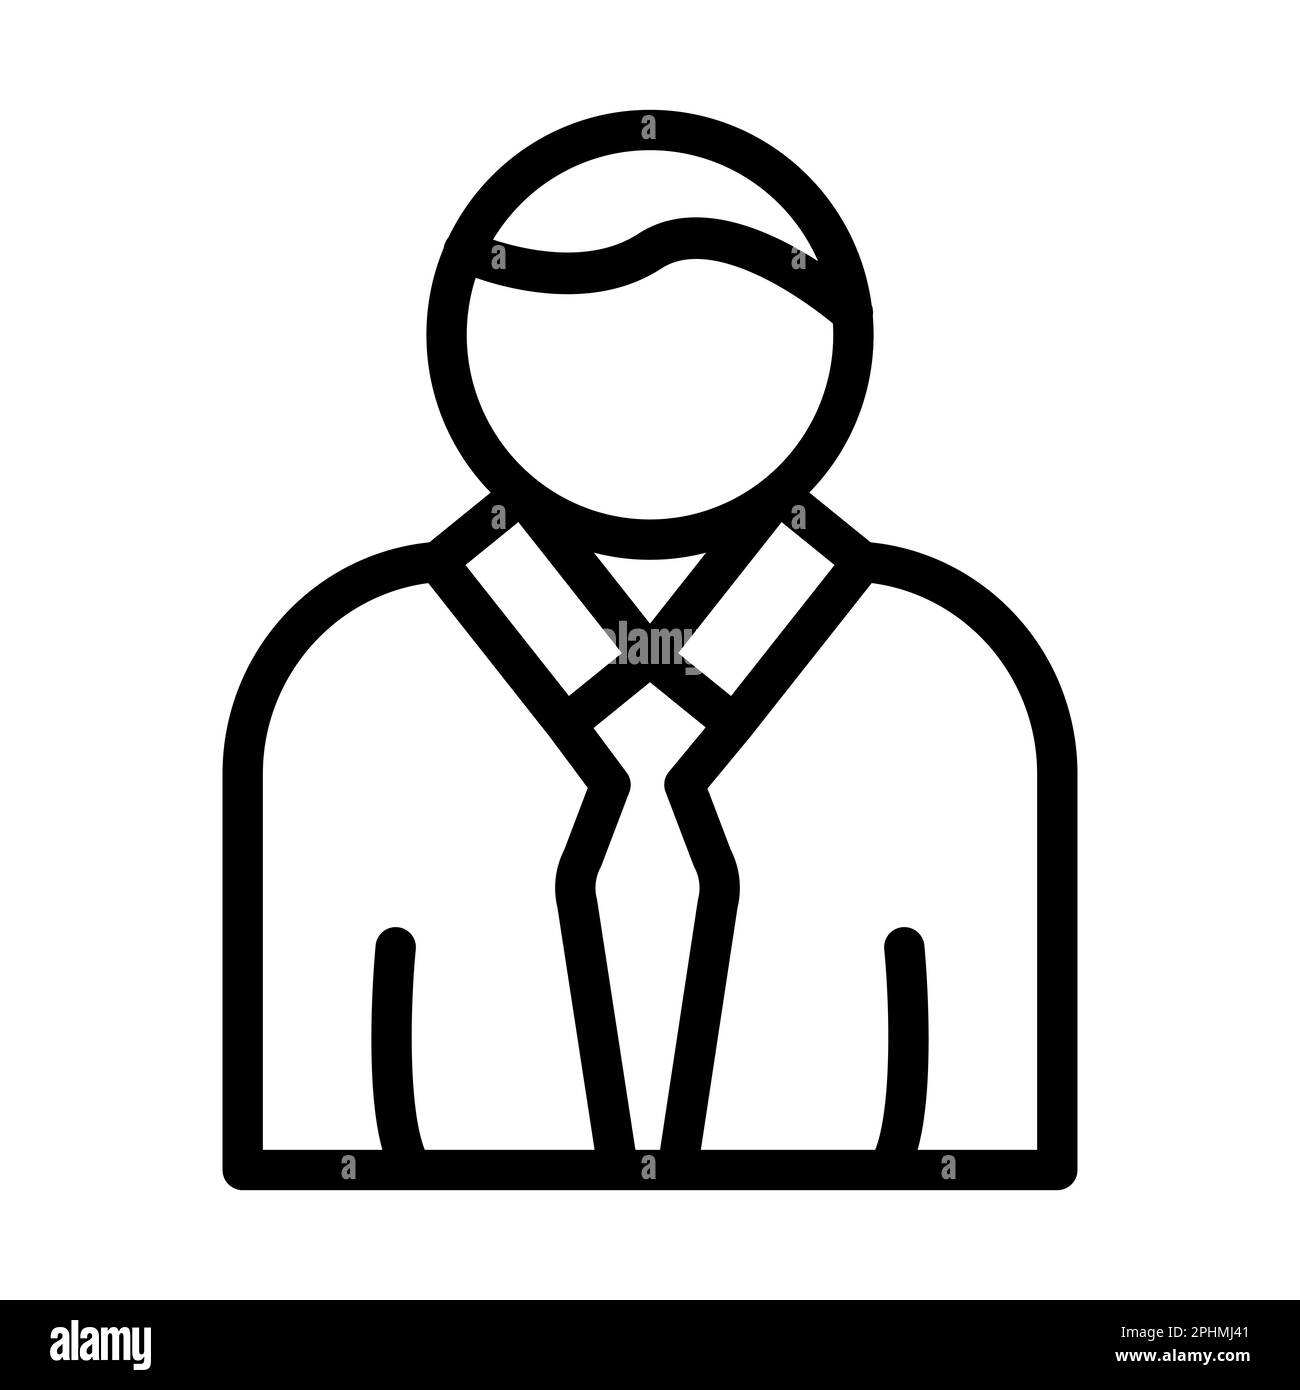 Commercial User Vector Thick Line Icon For Personal And Commercial Use. Stock Photo